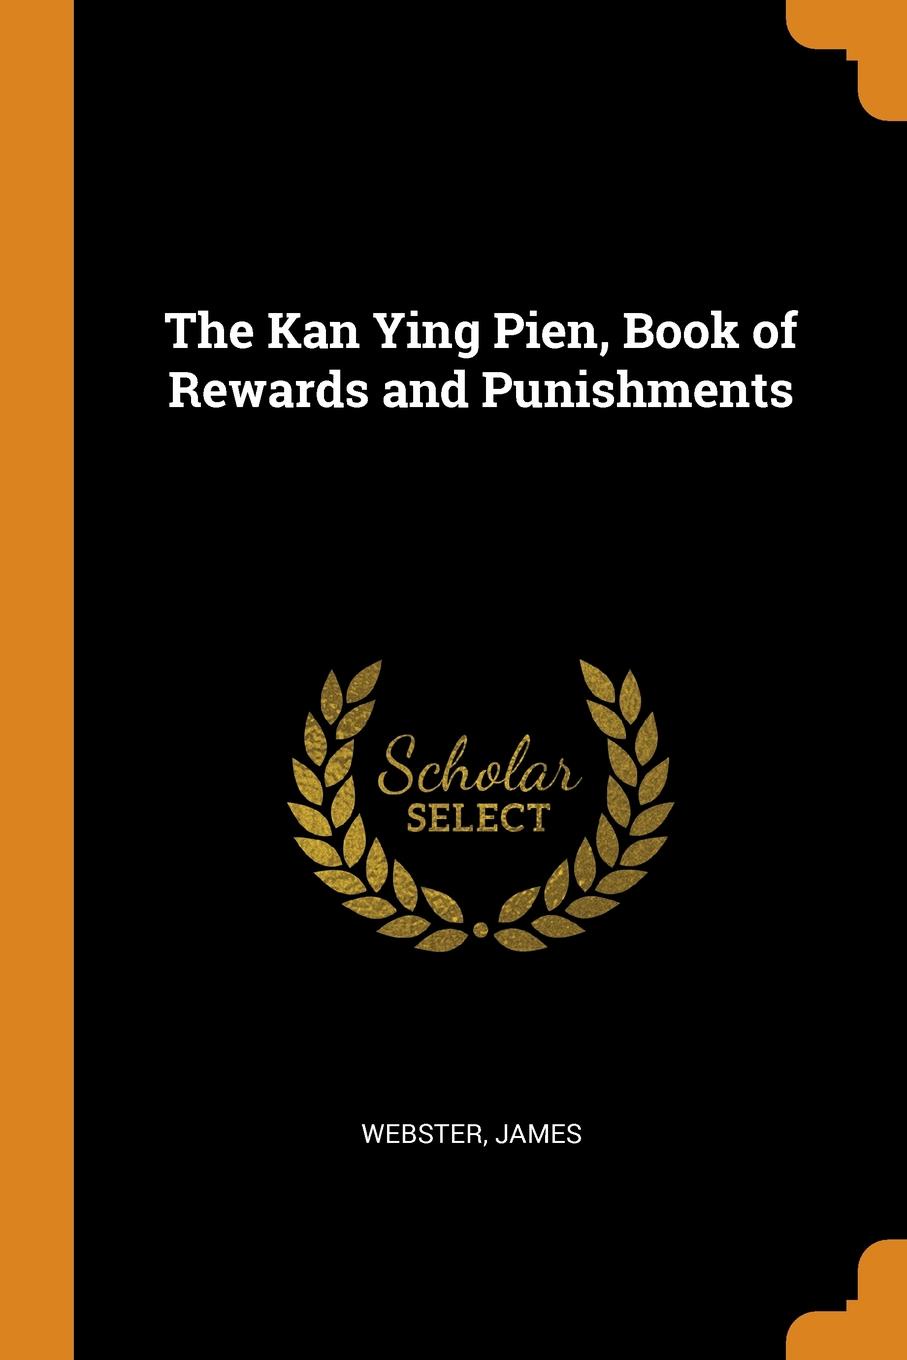 The Kan Ying Pien, Book of Rewards and Punishments